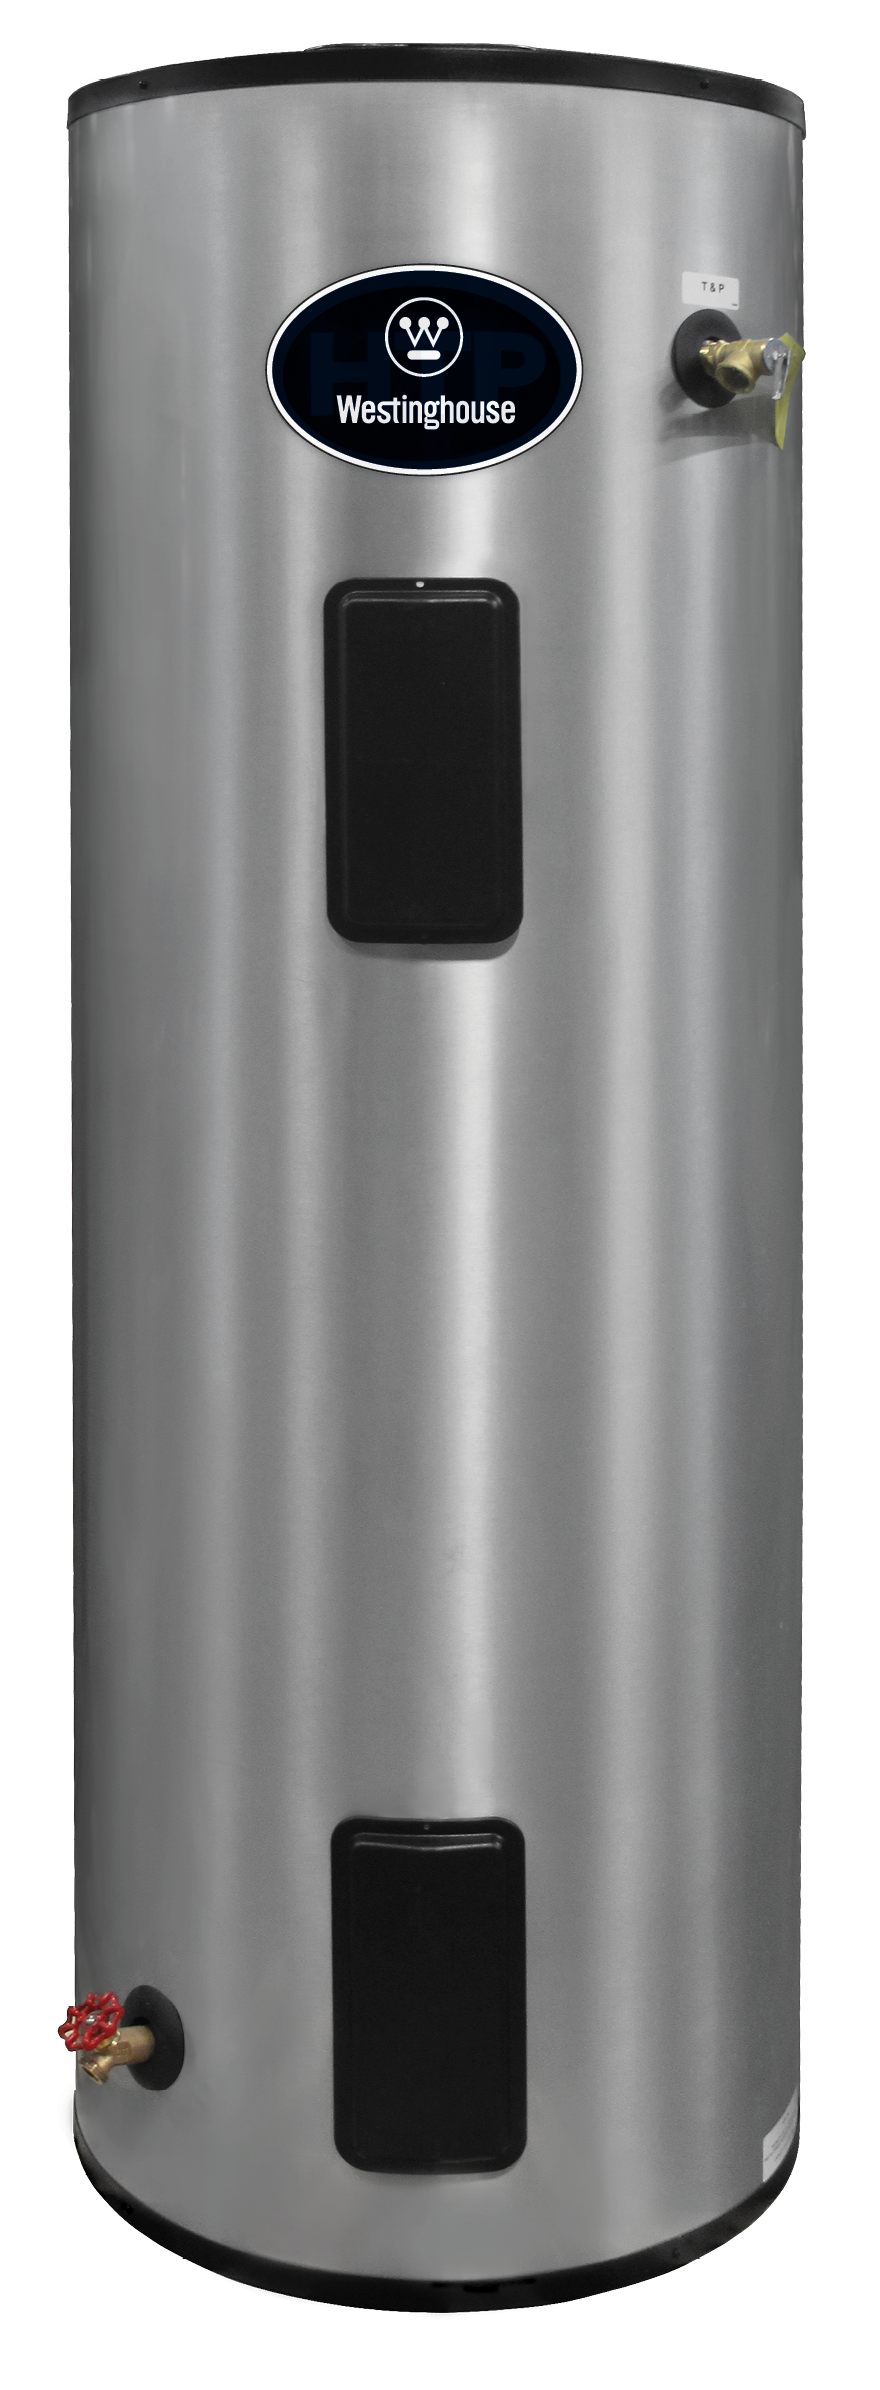 Photo of a Westinghouse electric water heater. 